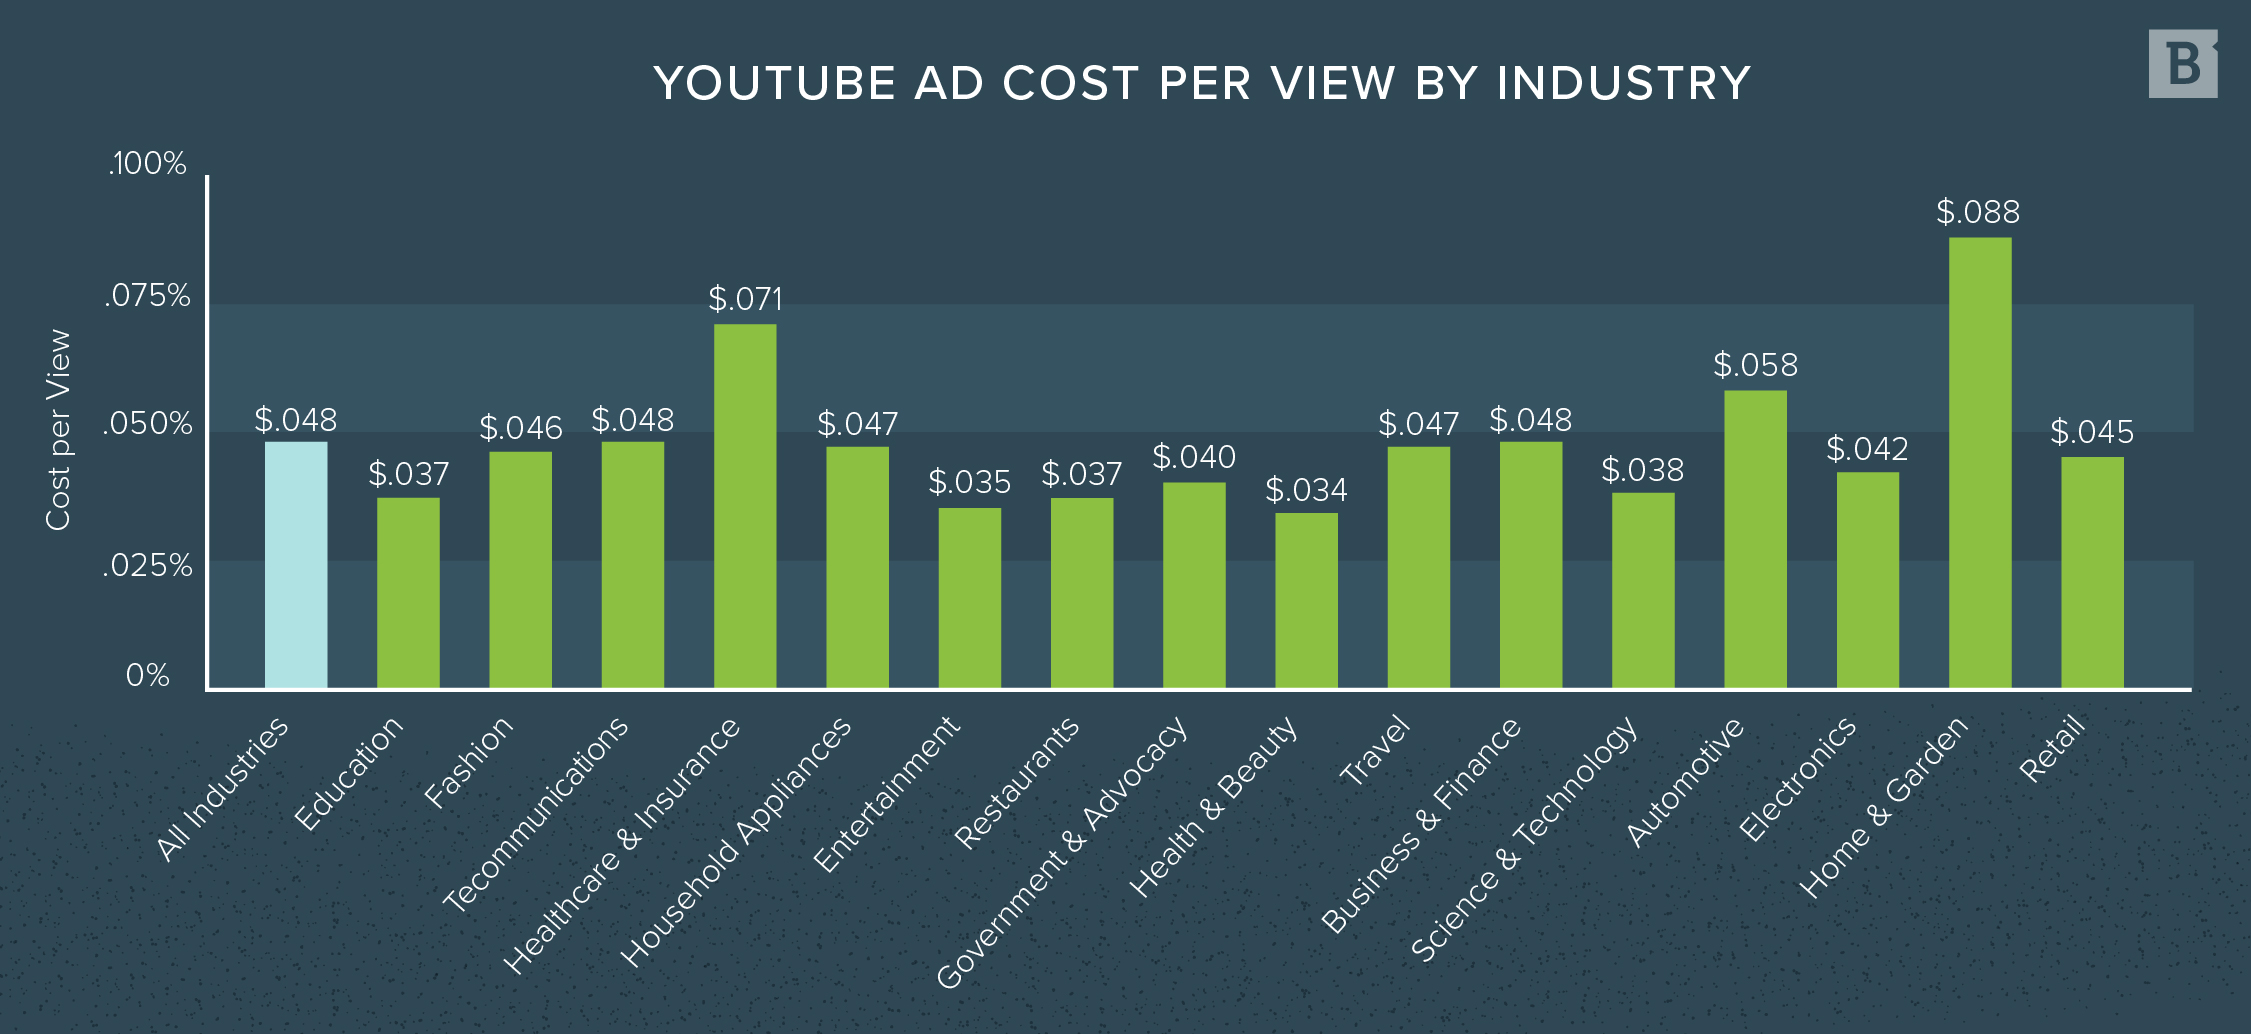 YouTube ad cost per view by industry